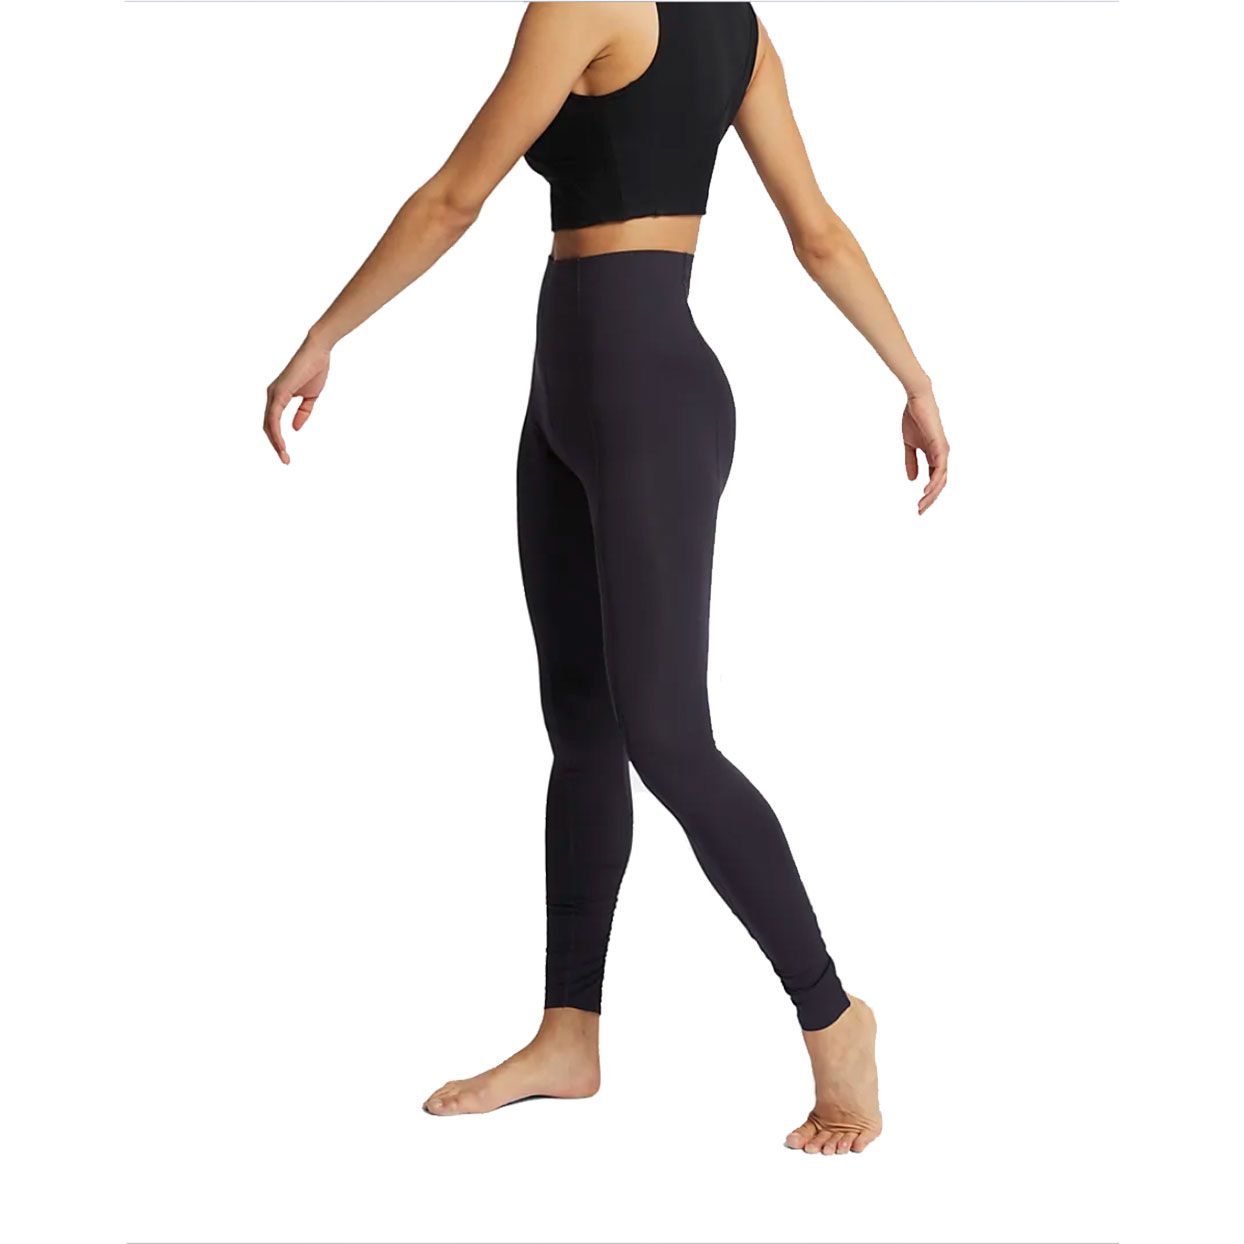 Details about   Women's Champion Workout Tights Pants Ultra High-Rise Full Length Ultra High Gym 